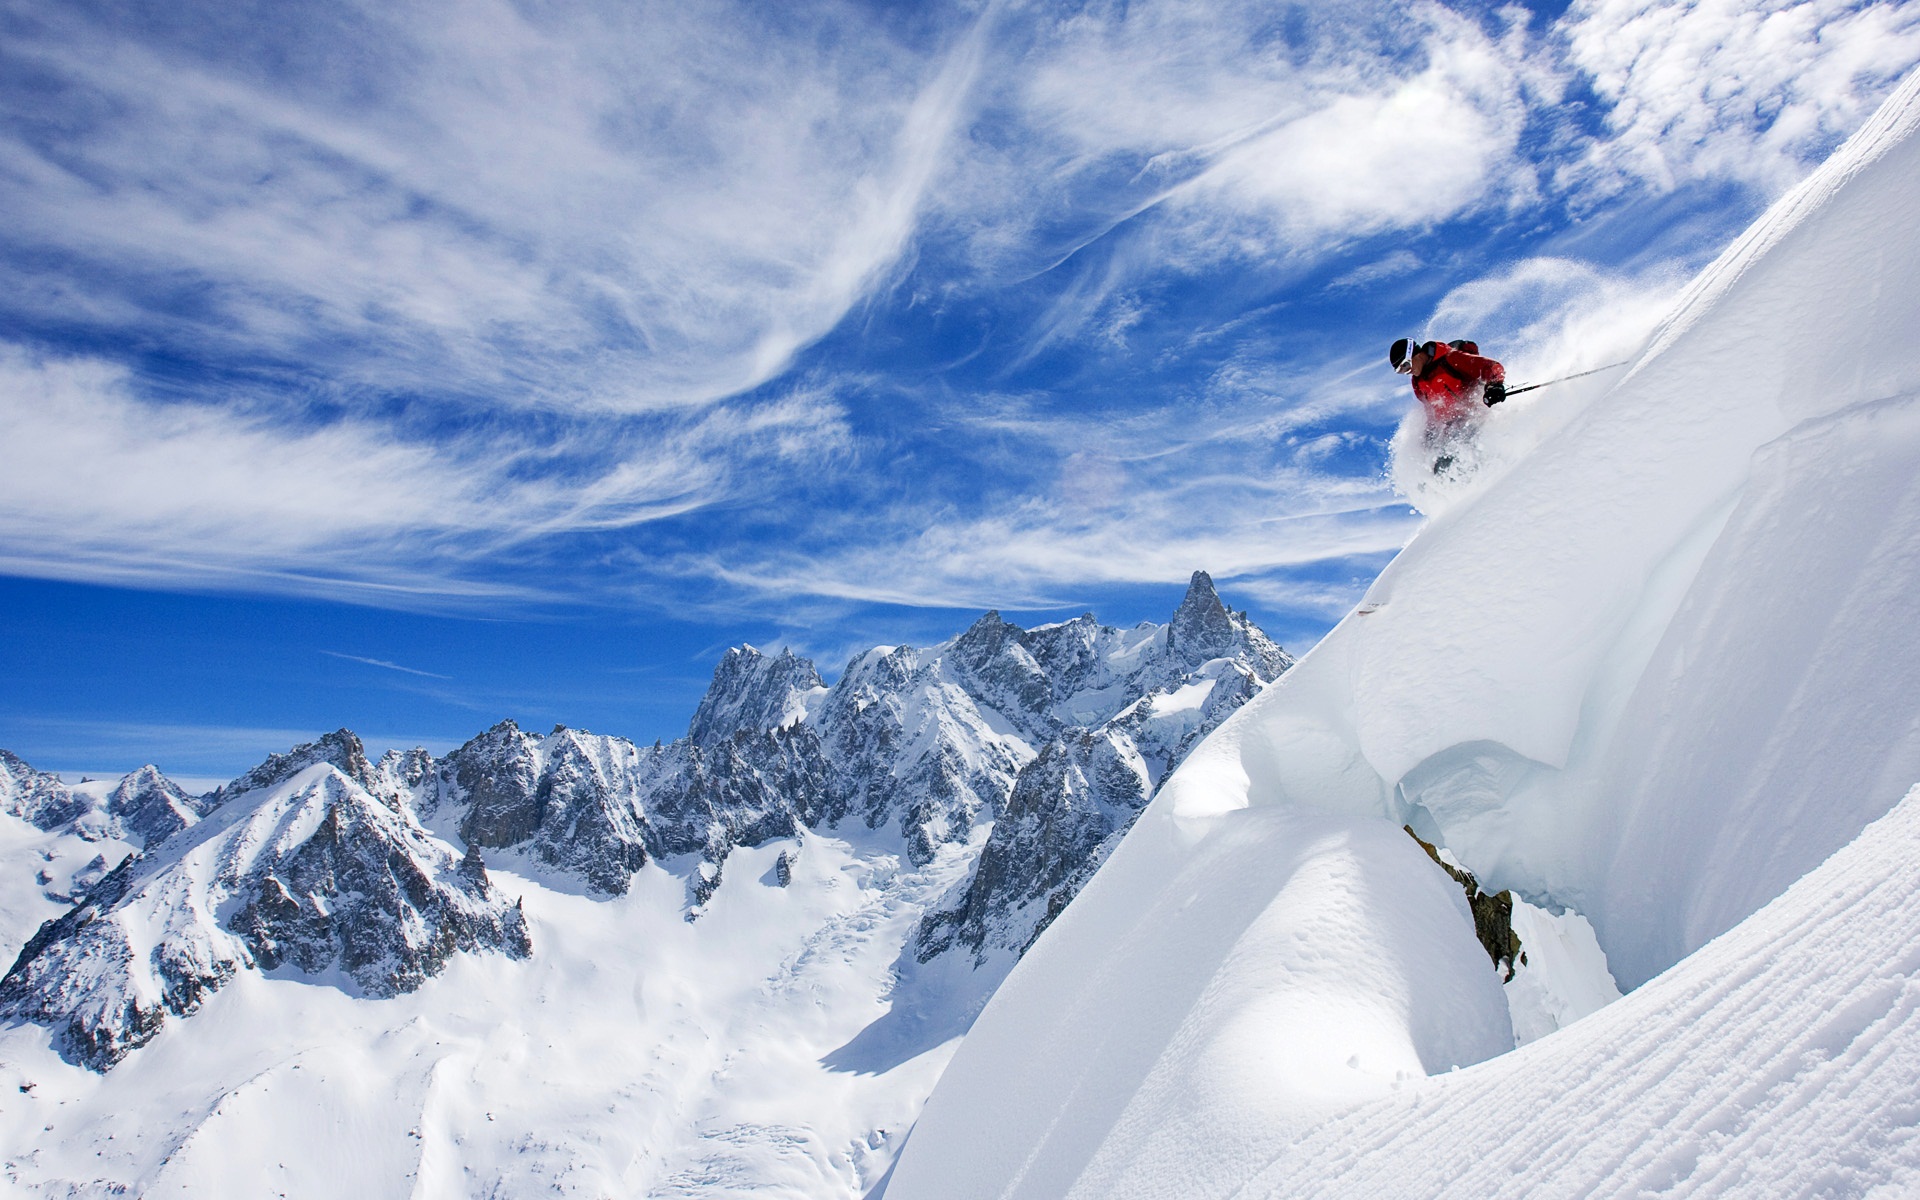 Skiing in France   Skiing Wallpaper 34546763 1920x1200